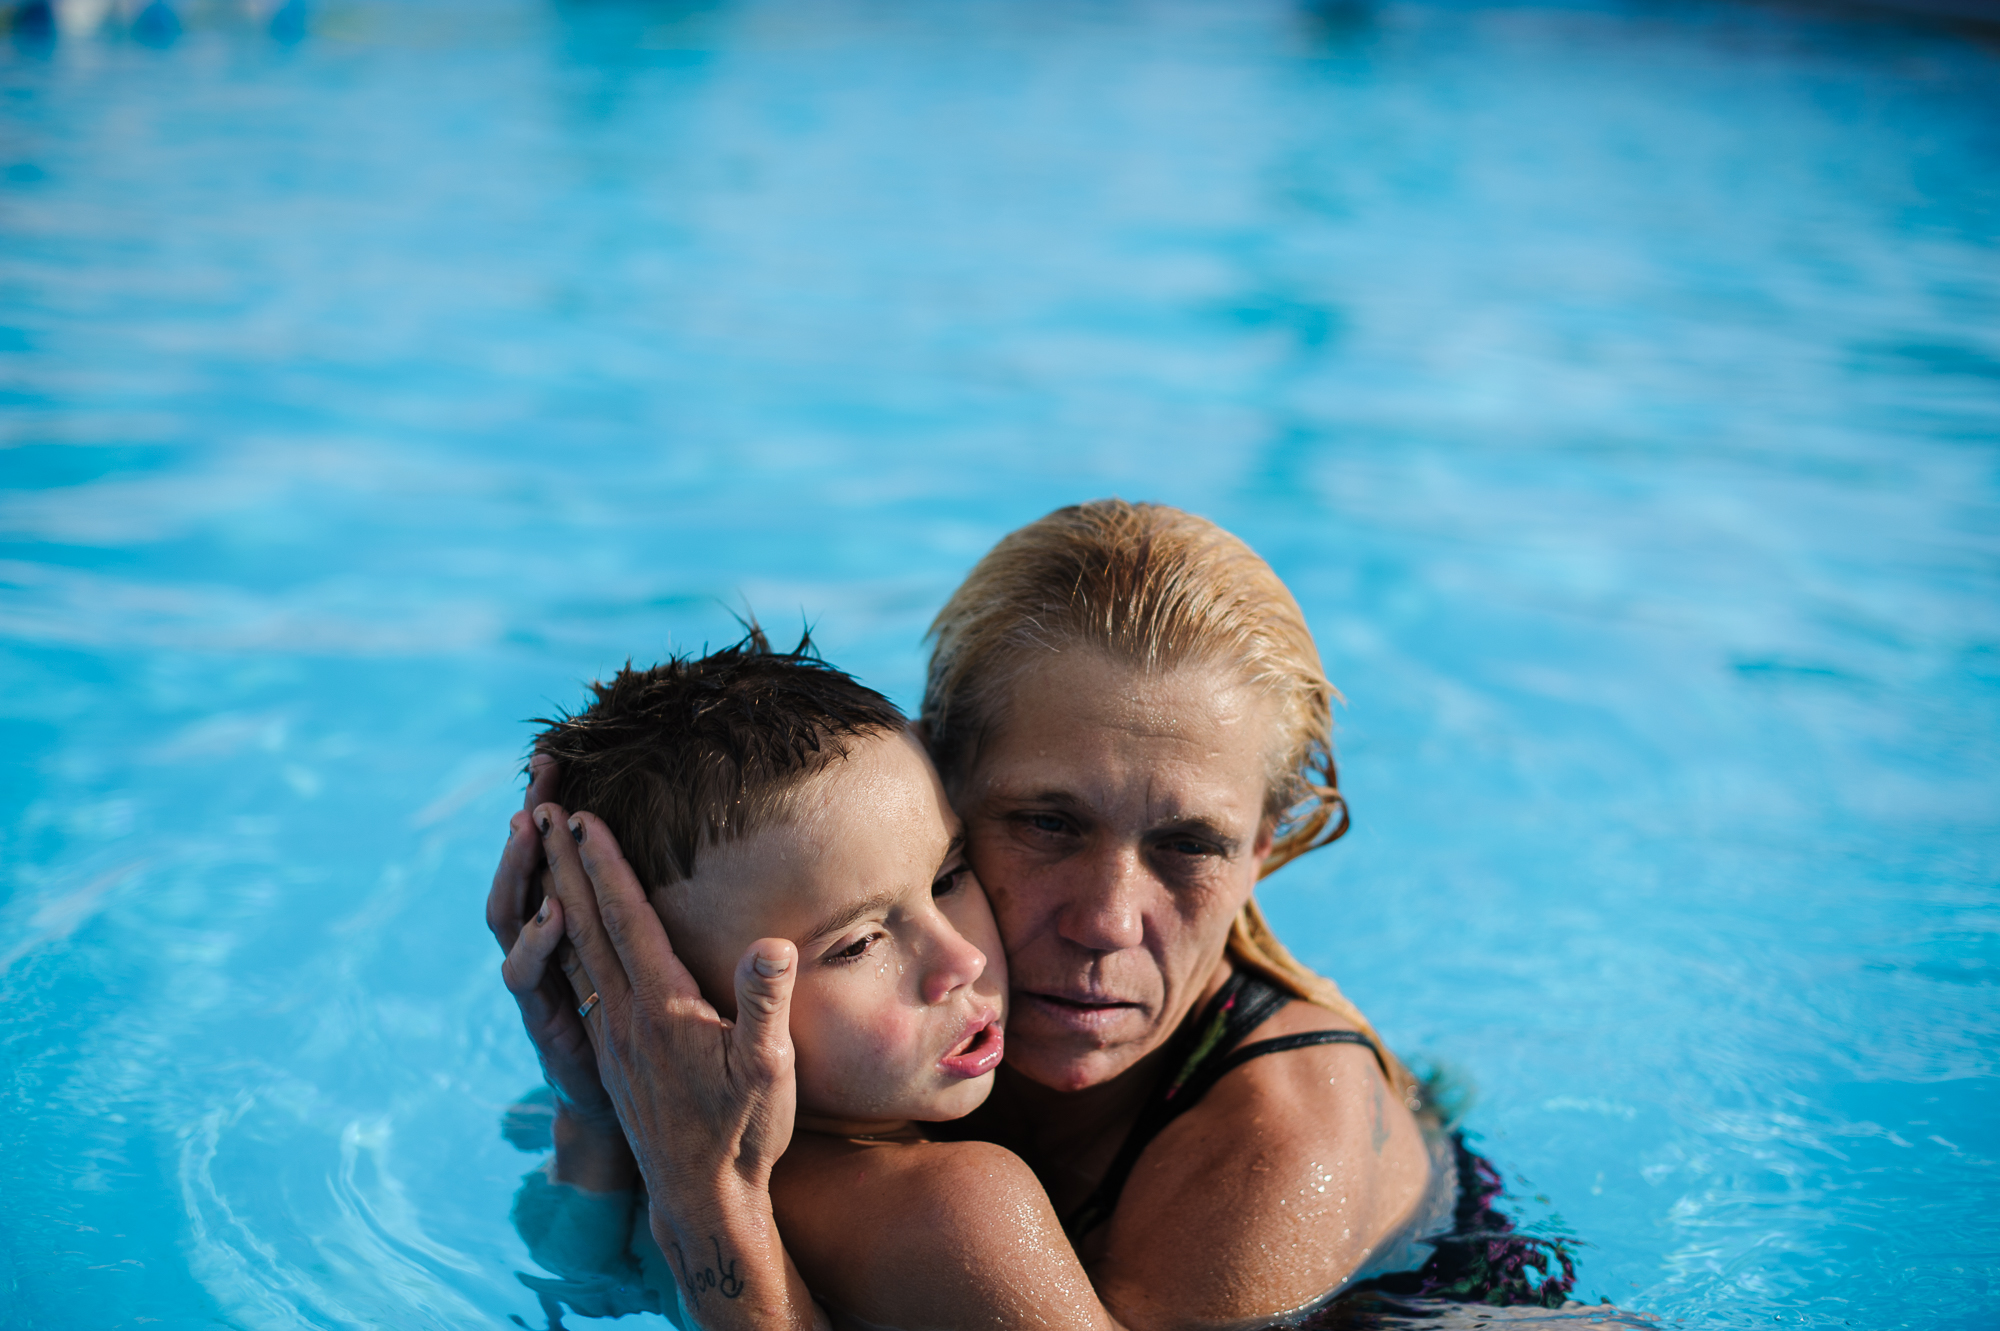  Eve holds her youngest son, Michael, in the pool at the motel, 2013. 